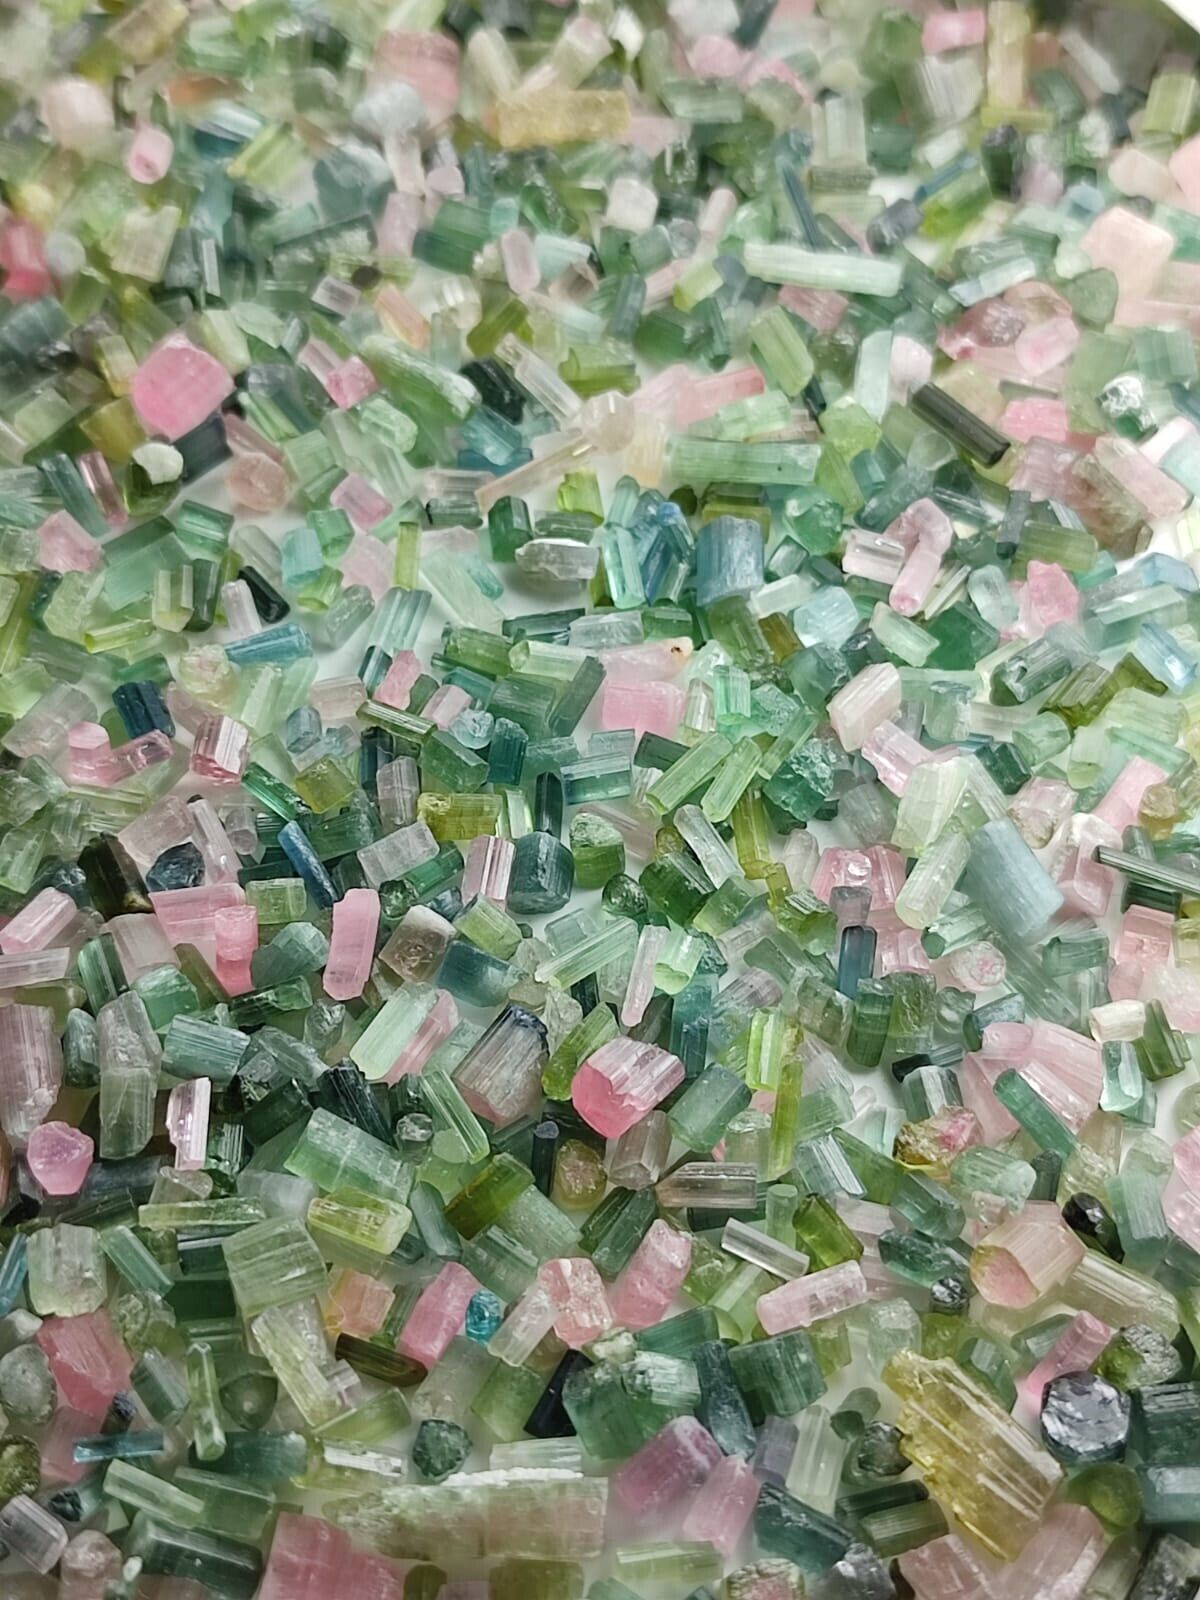 250-gm Tourmaline Multi Color (Green& Pink) Crystals Lot @Afghanistan 